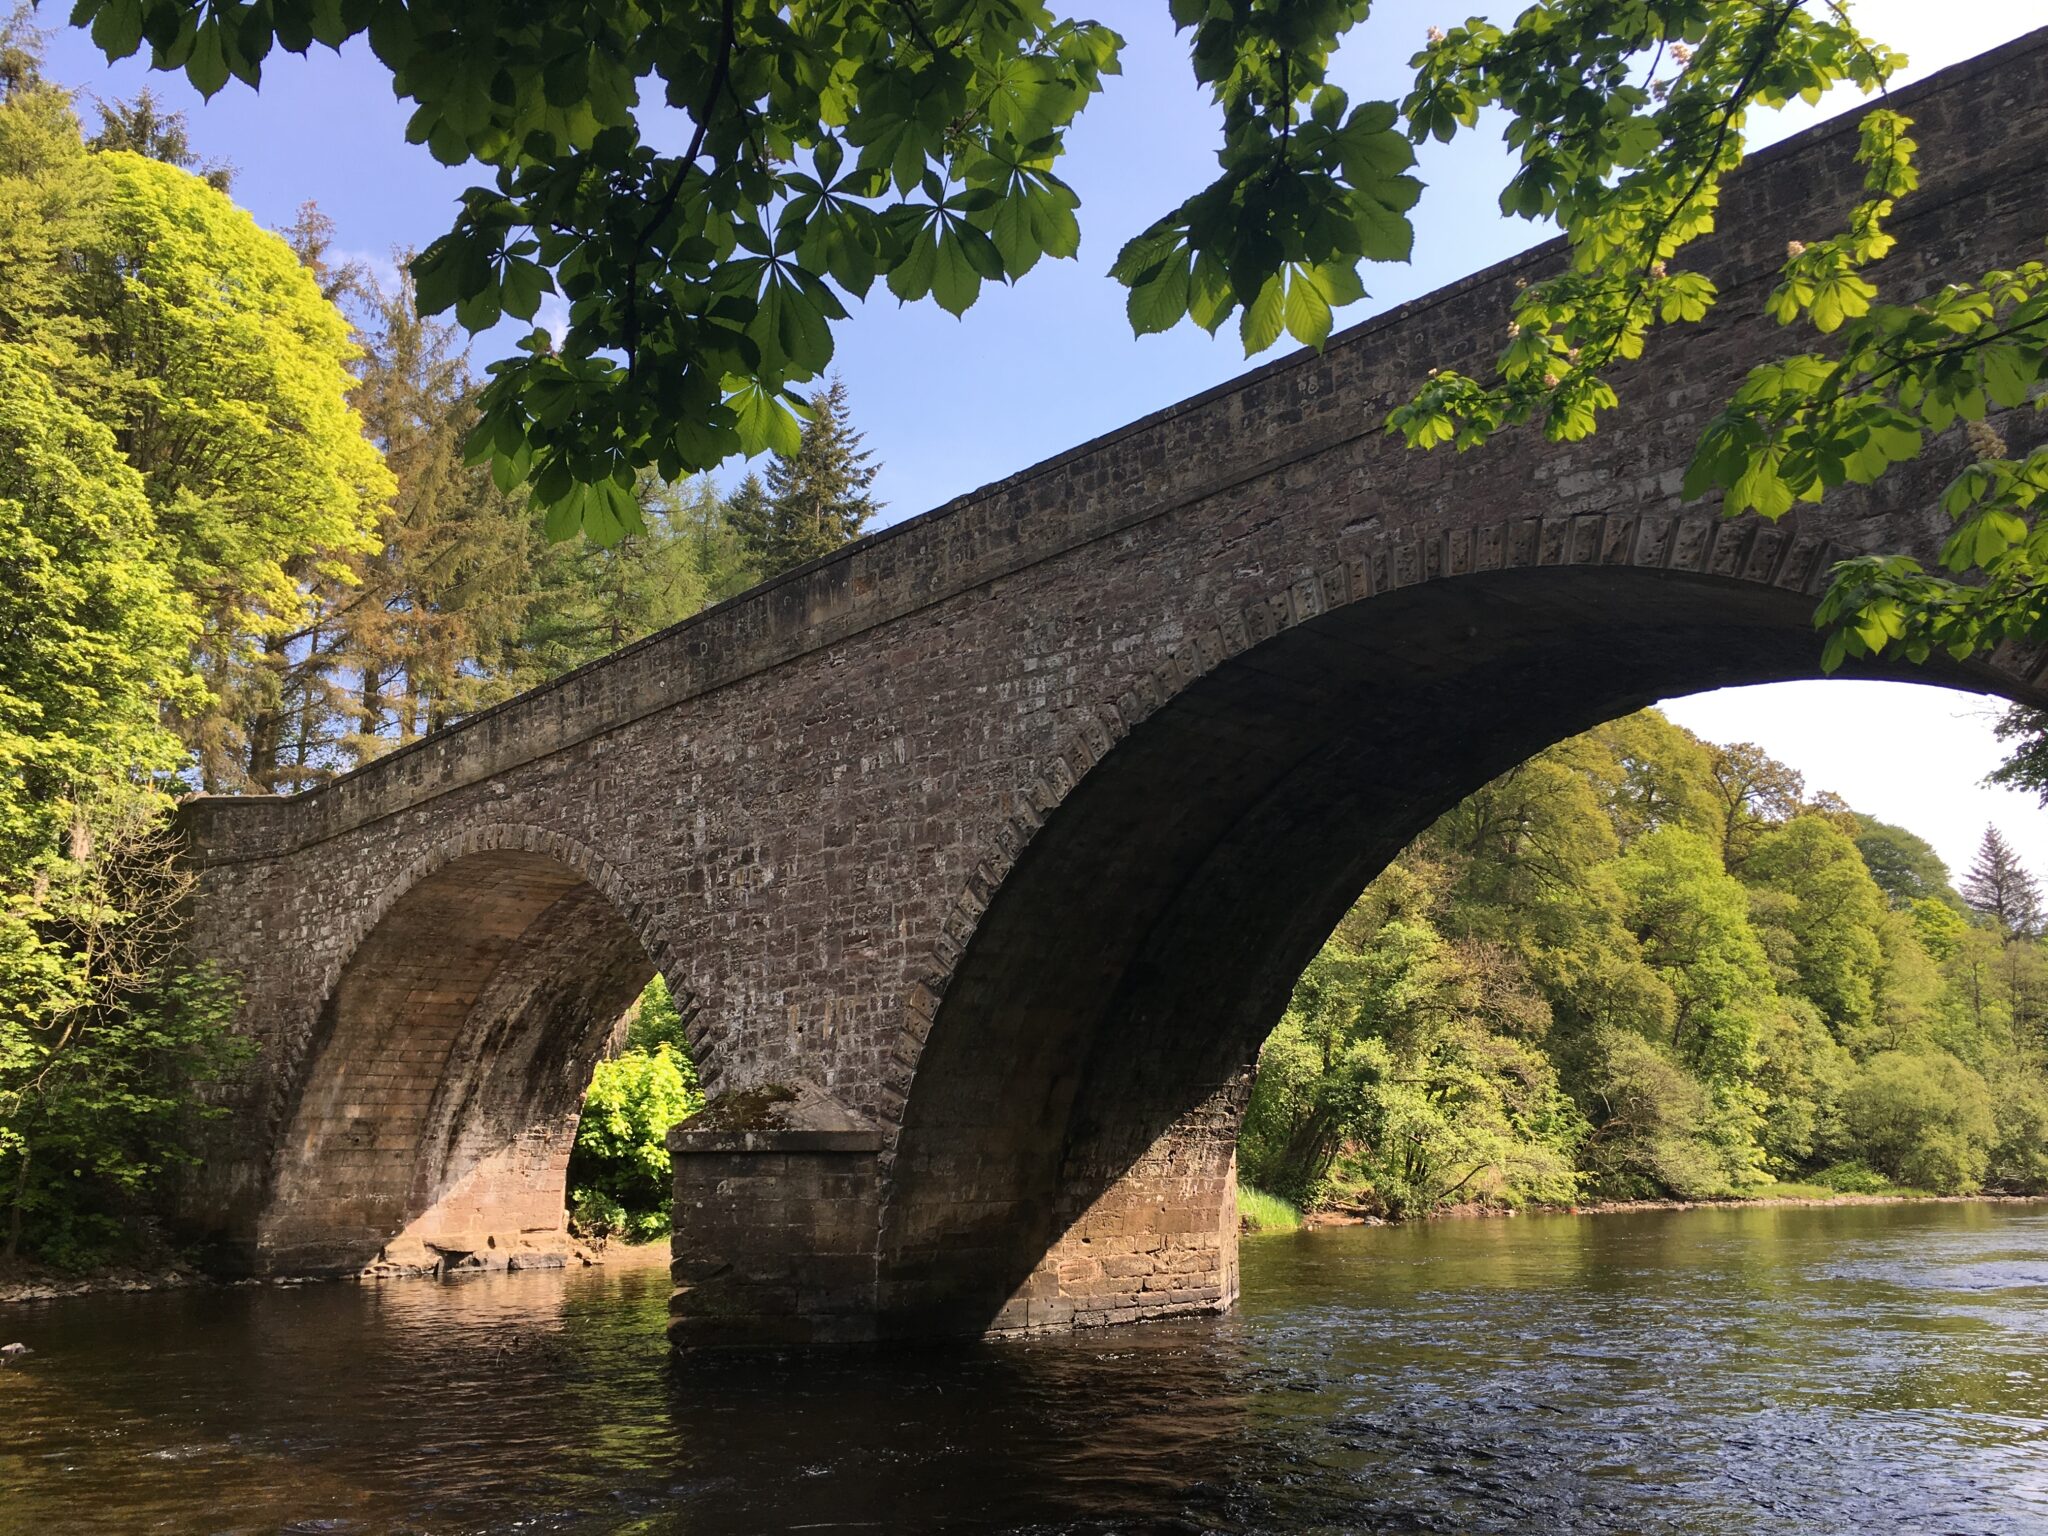 £100,000 PROJECT TO REPAIR SCOUR TO A84 BRIDGE OF TEITH NEAR DOUNE